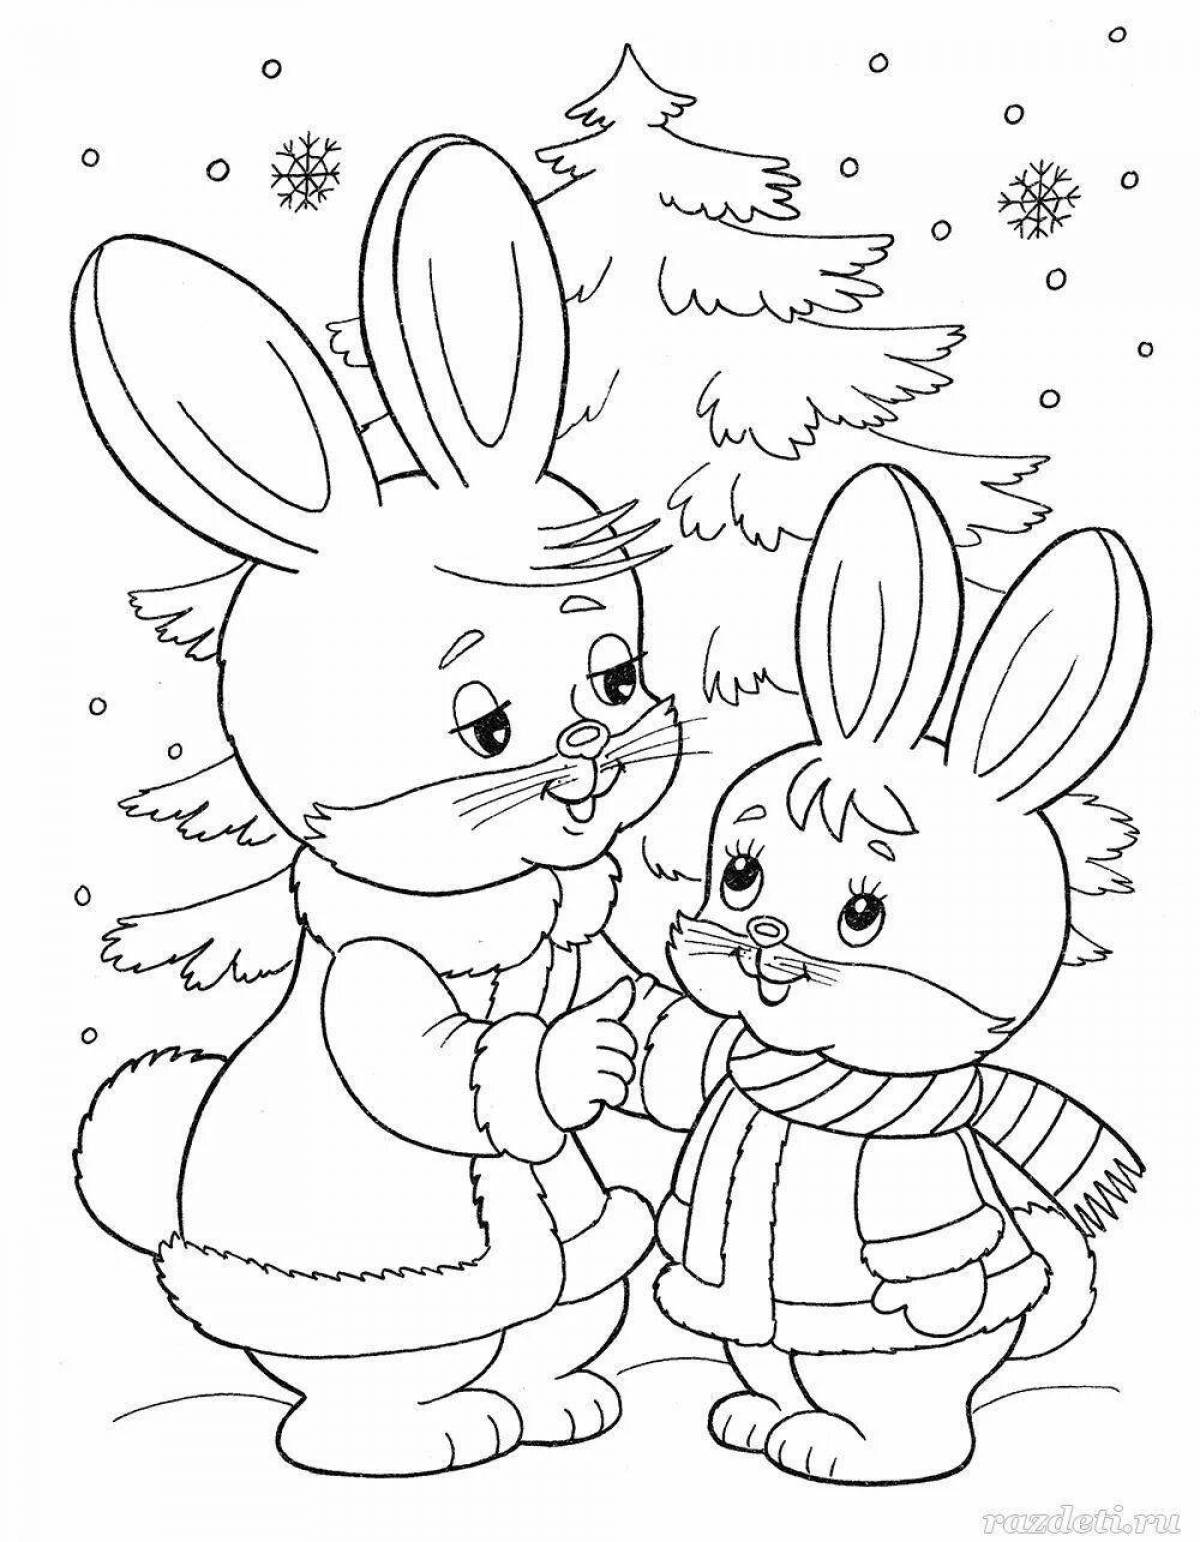 Playtime winter coloring book for children 2-3 years old